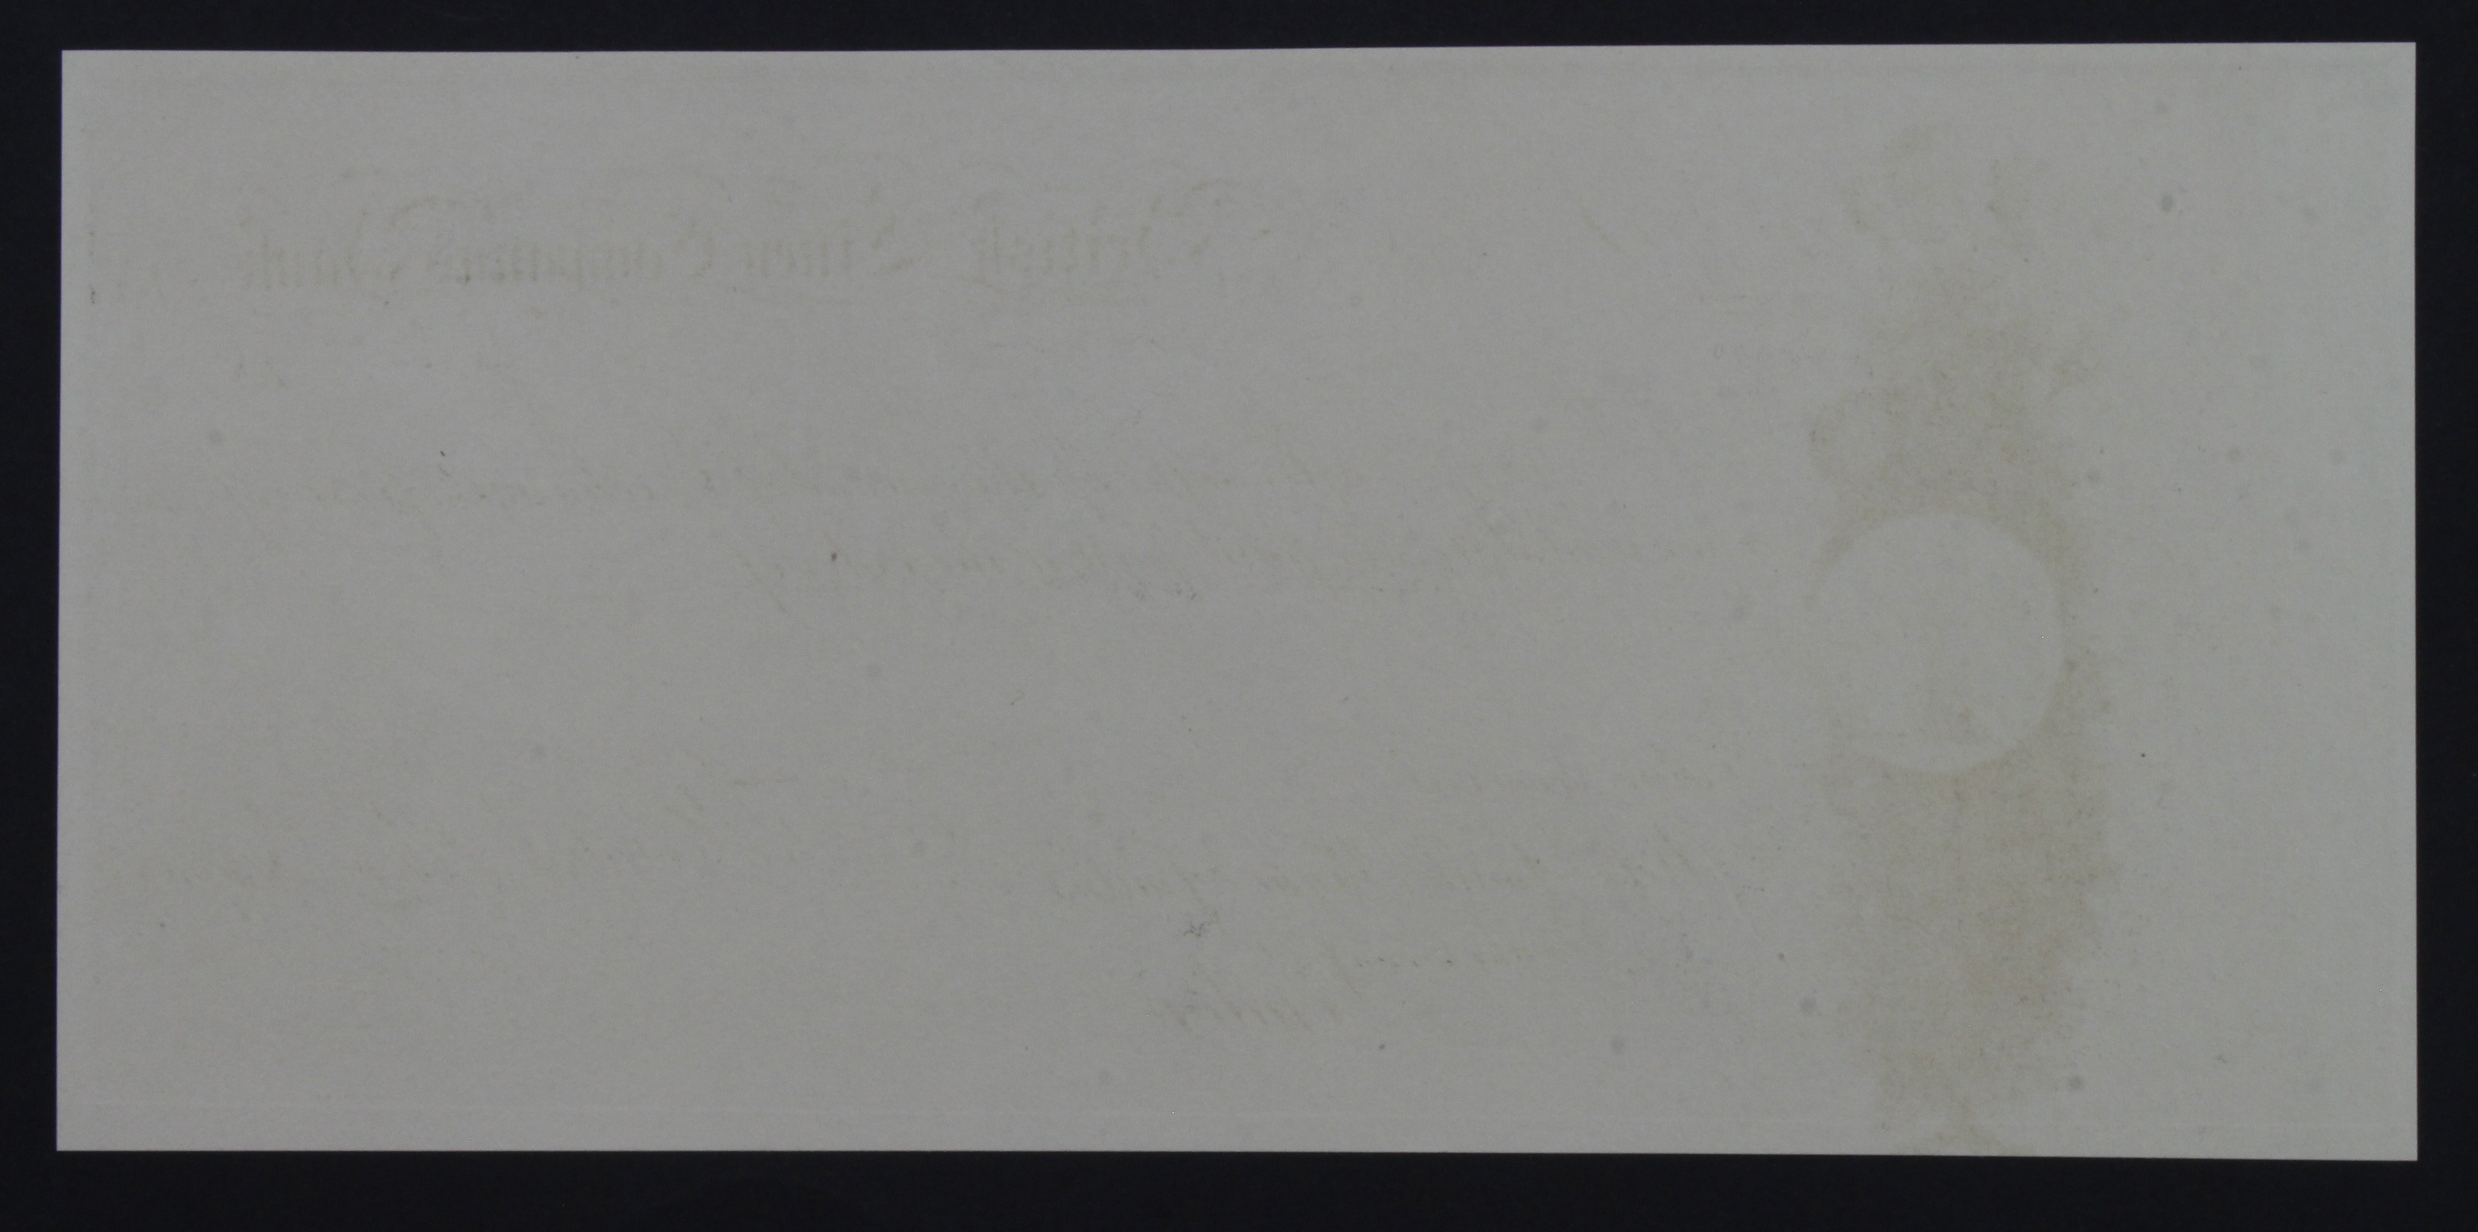 Cheque, York City & County Banking Company PROOF cheque 18xx, engraved and printed by Lizars, - Image 2 of 2